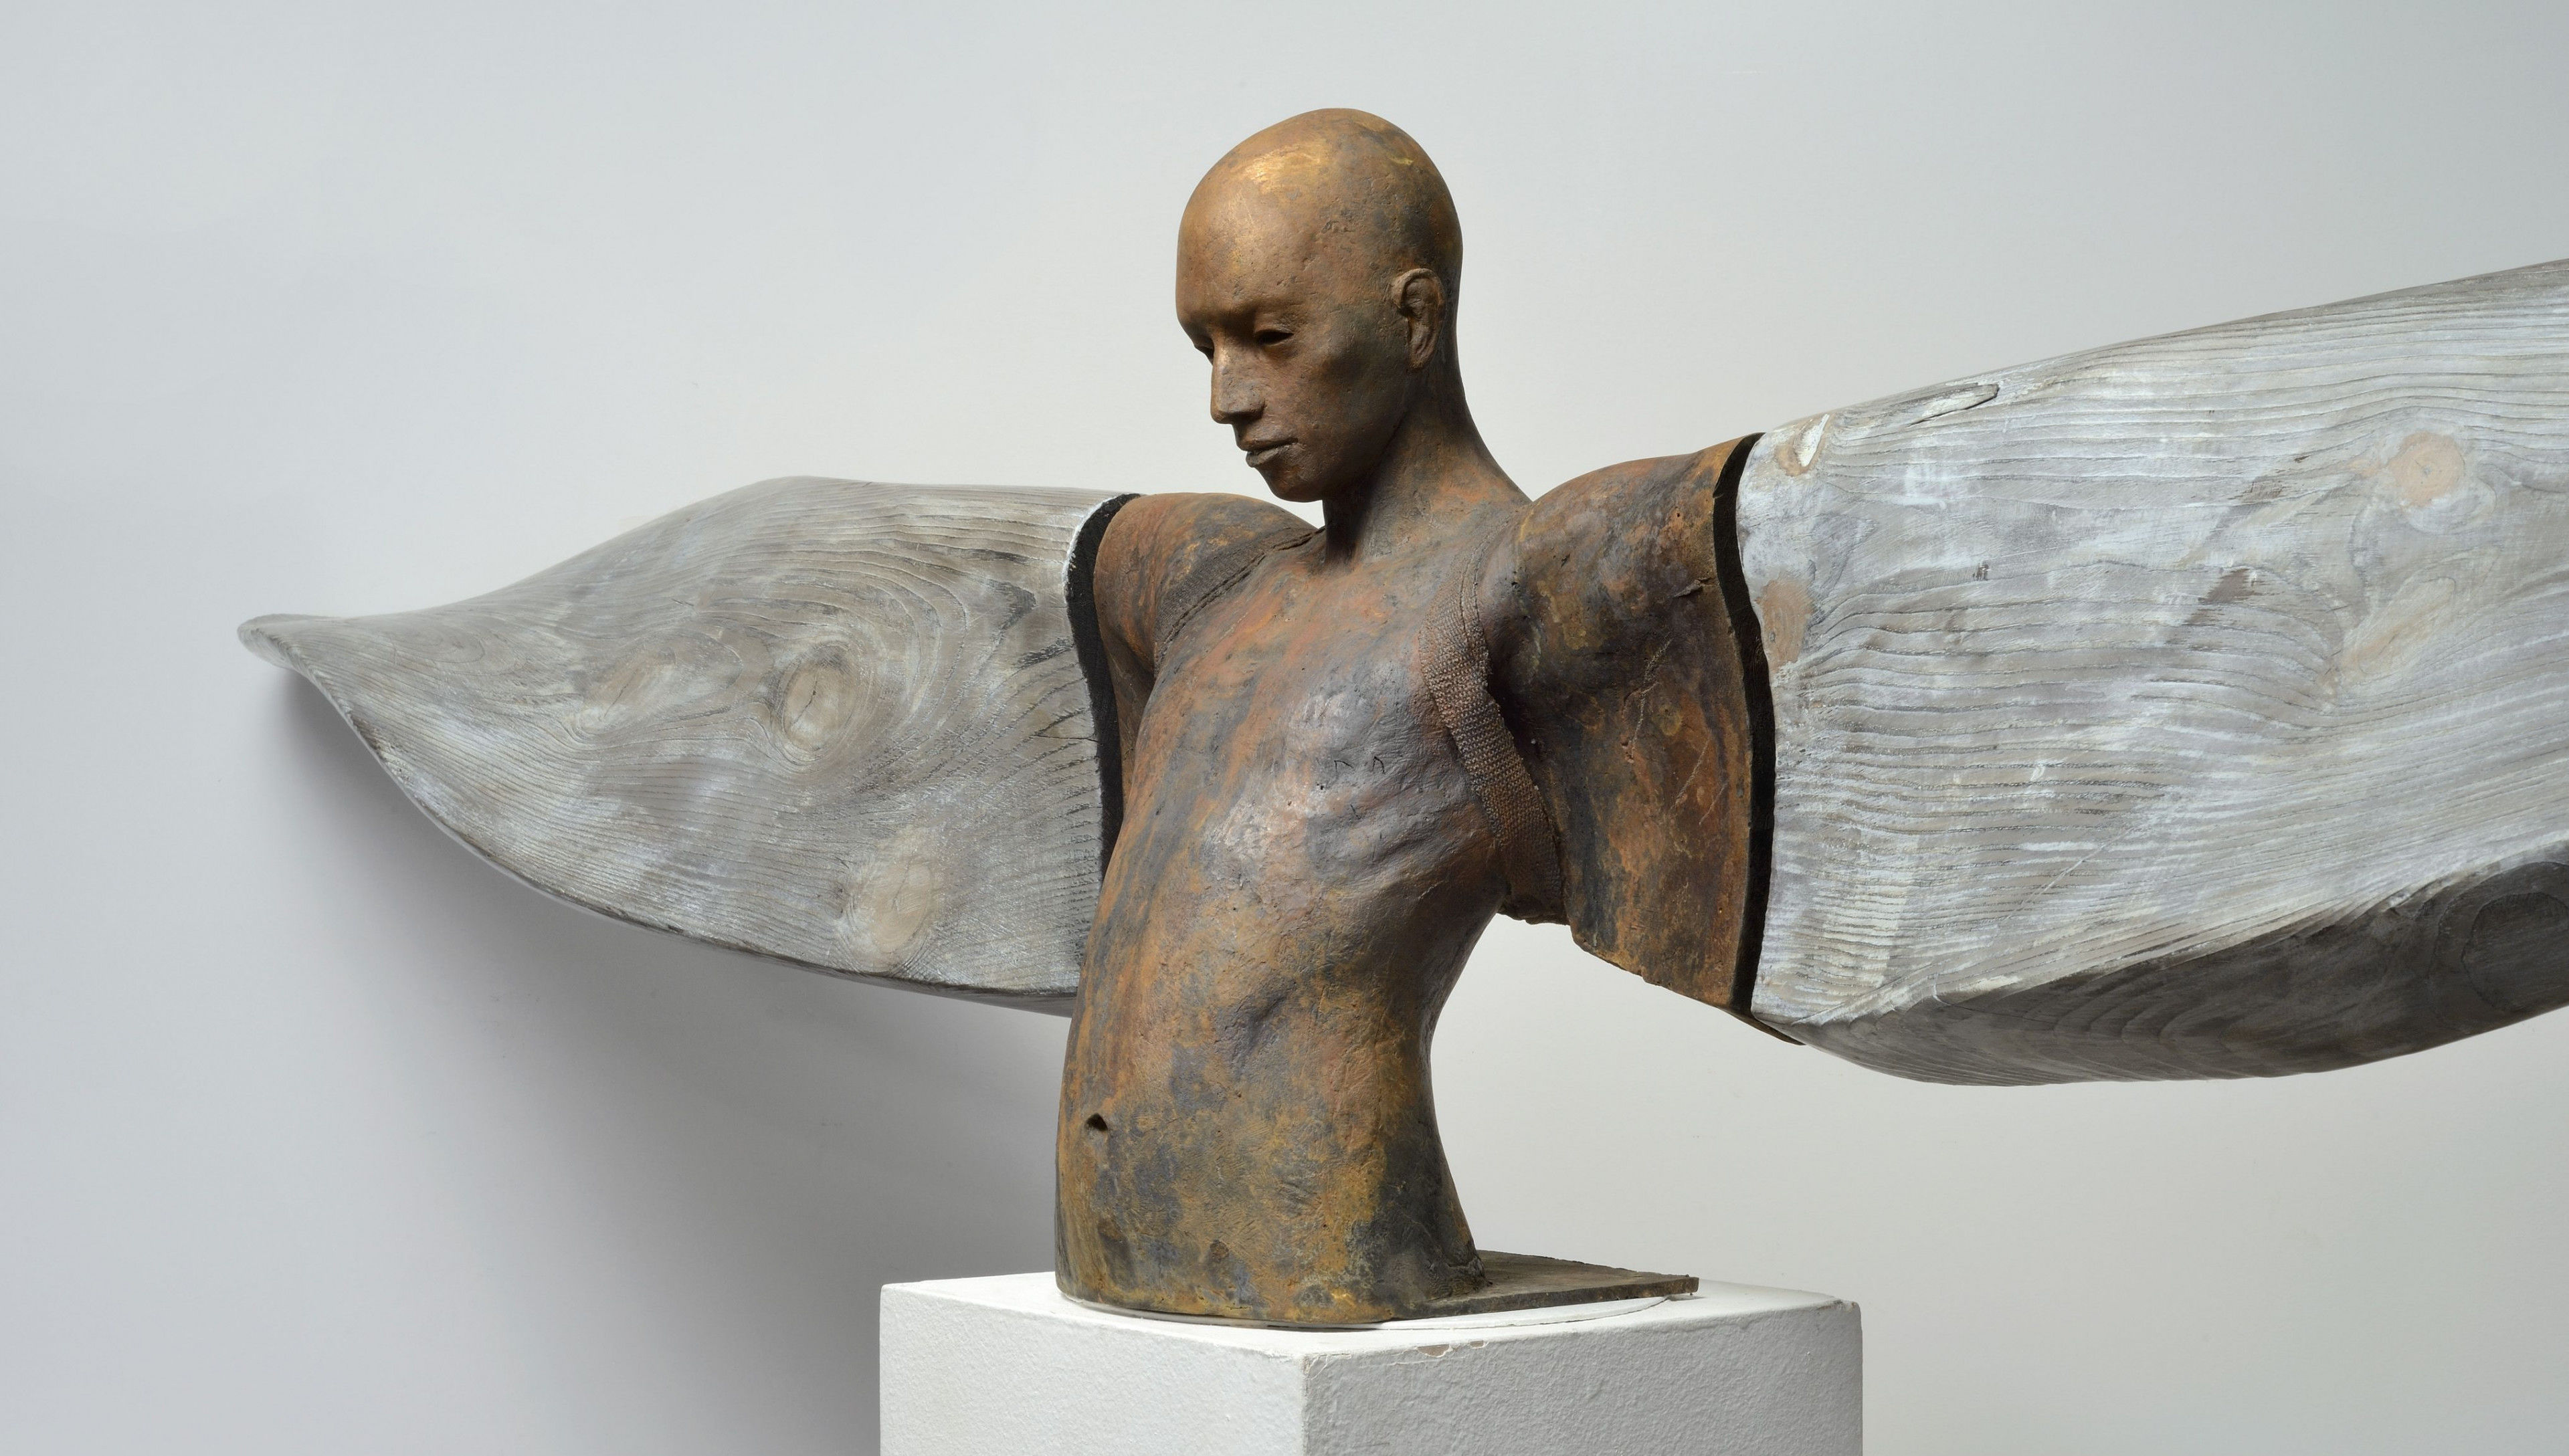 Contemporary bronze cast statue by Jesús Curiá available via Gallerease